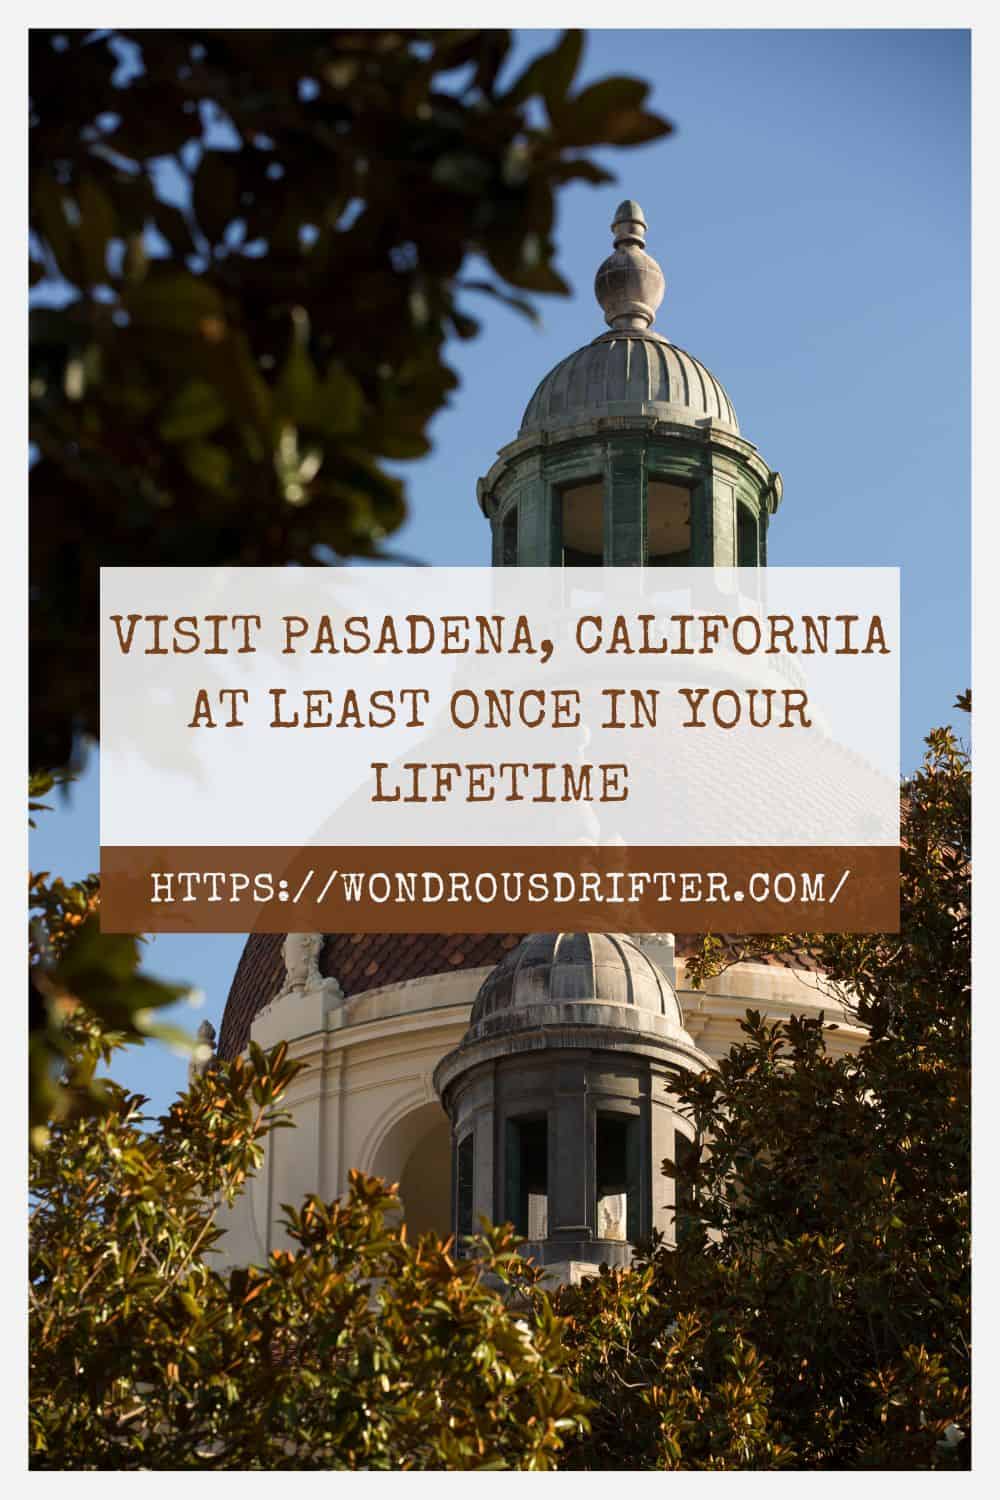 Visit Pasadena California at least once in your lifetime